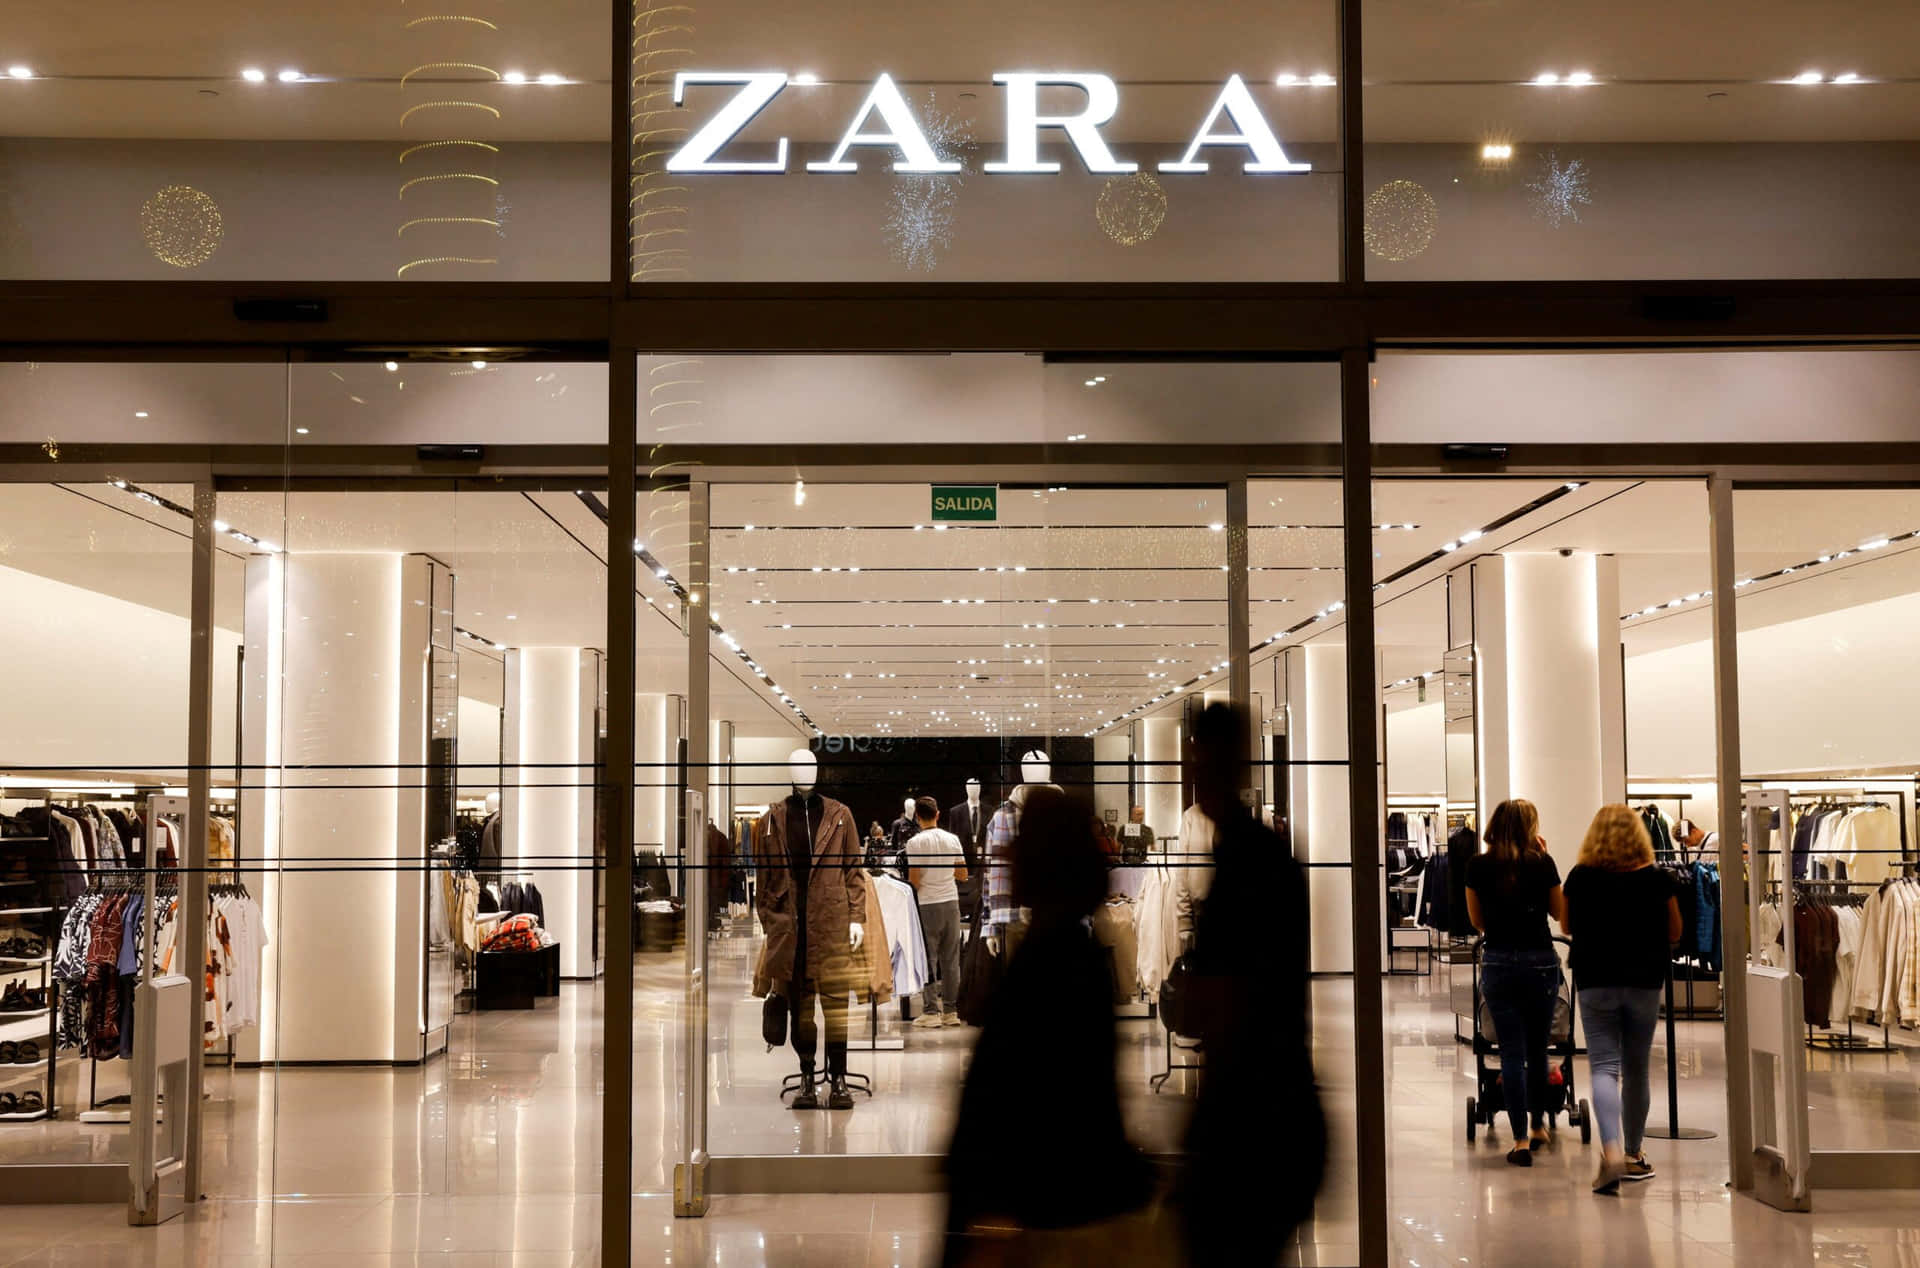 “Style that never goes out of fashion - The newest collection from ZARA”